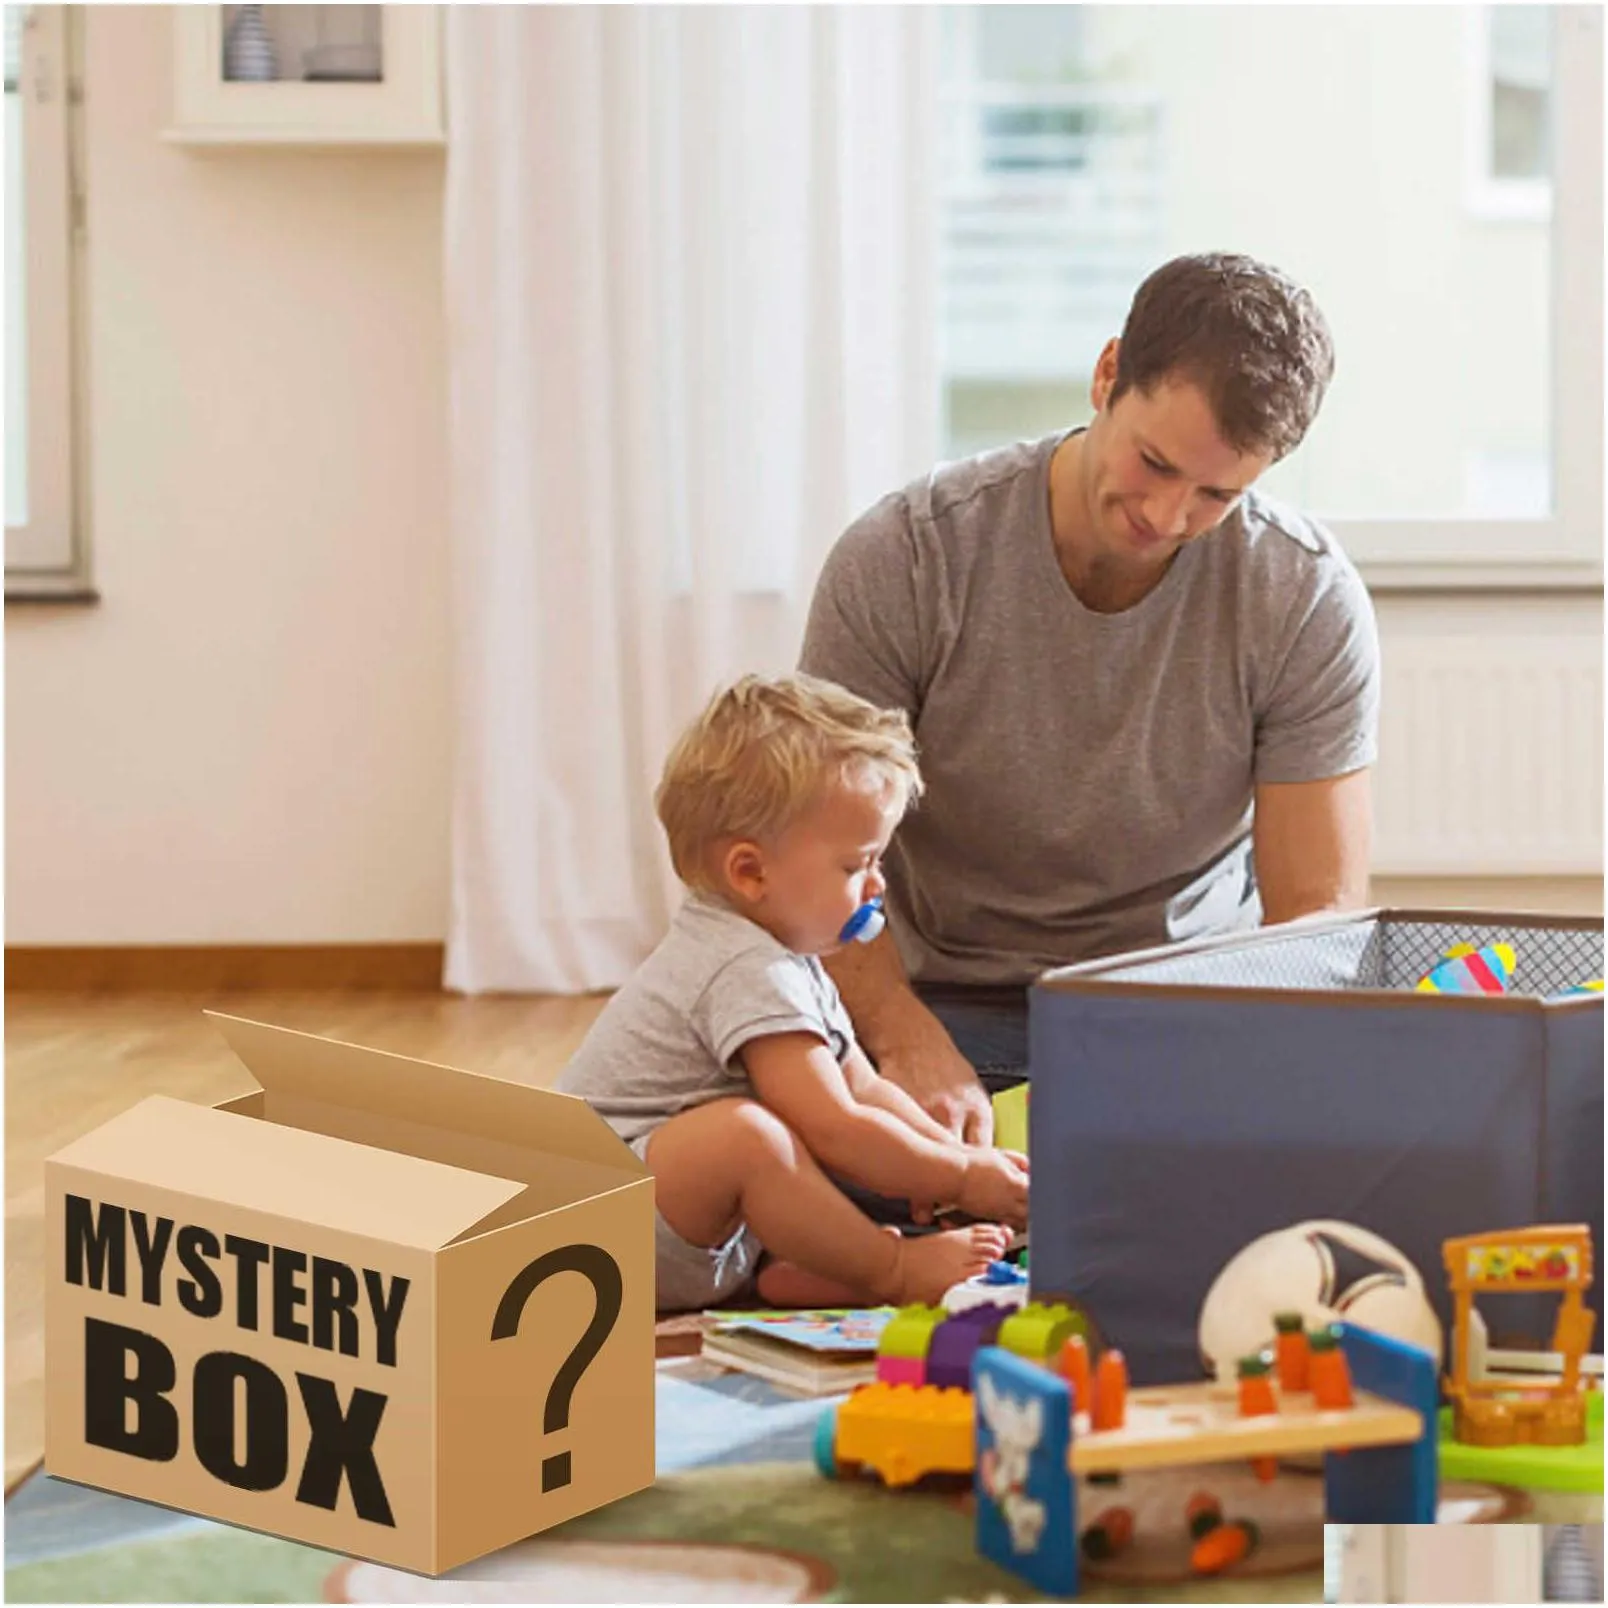 mystery box electronics random boxes birthday surprise gifts lucky gifts for adults such as bluetooth speakers bluetooth head3211